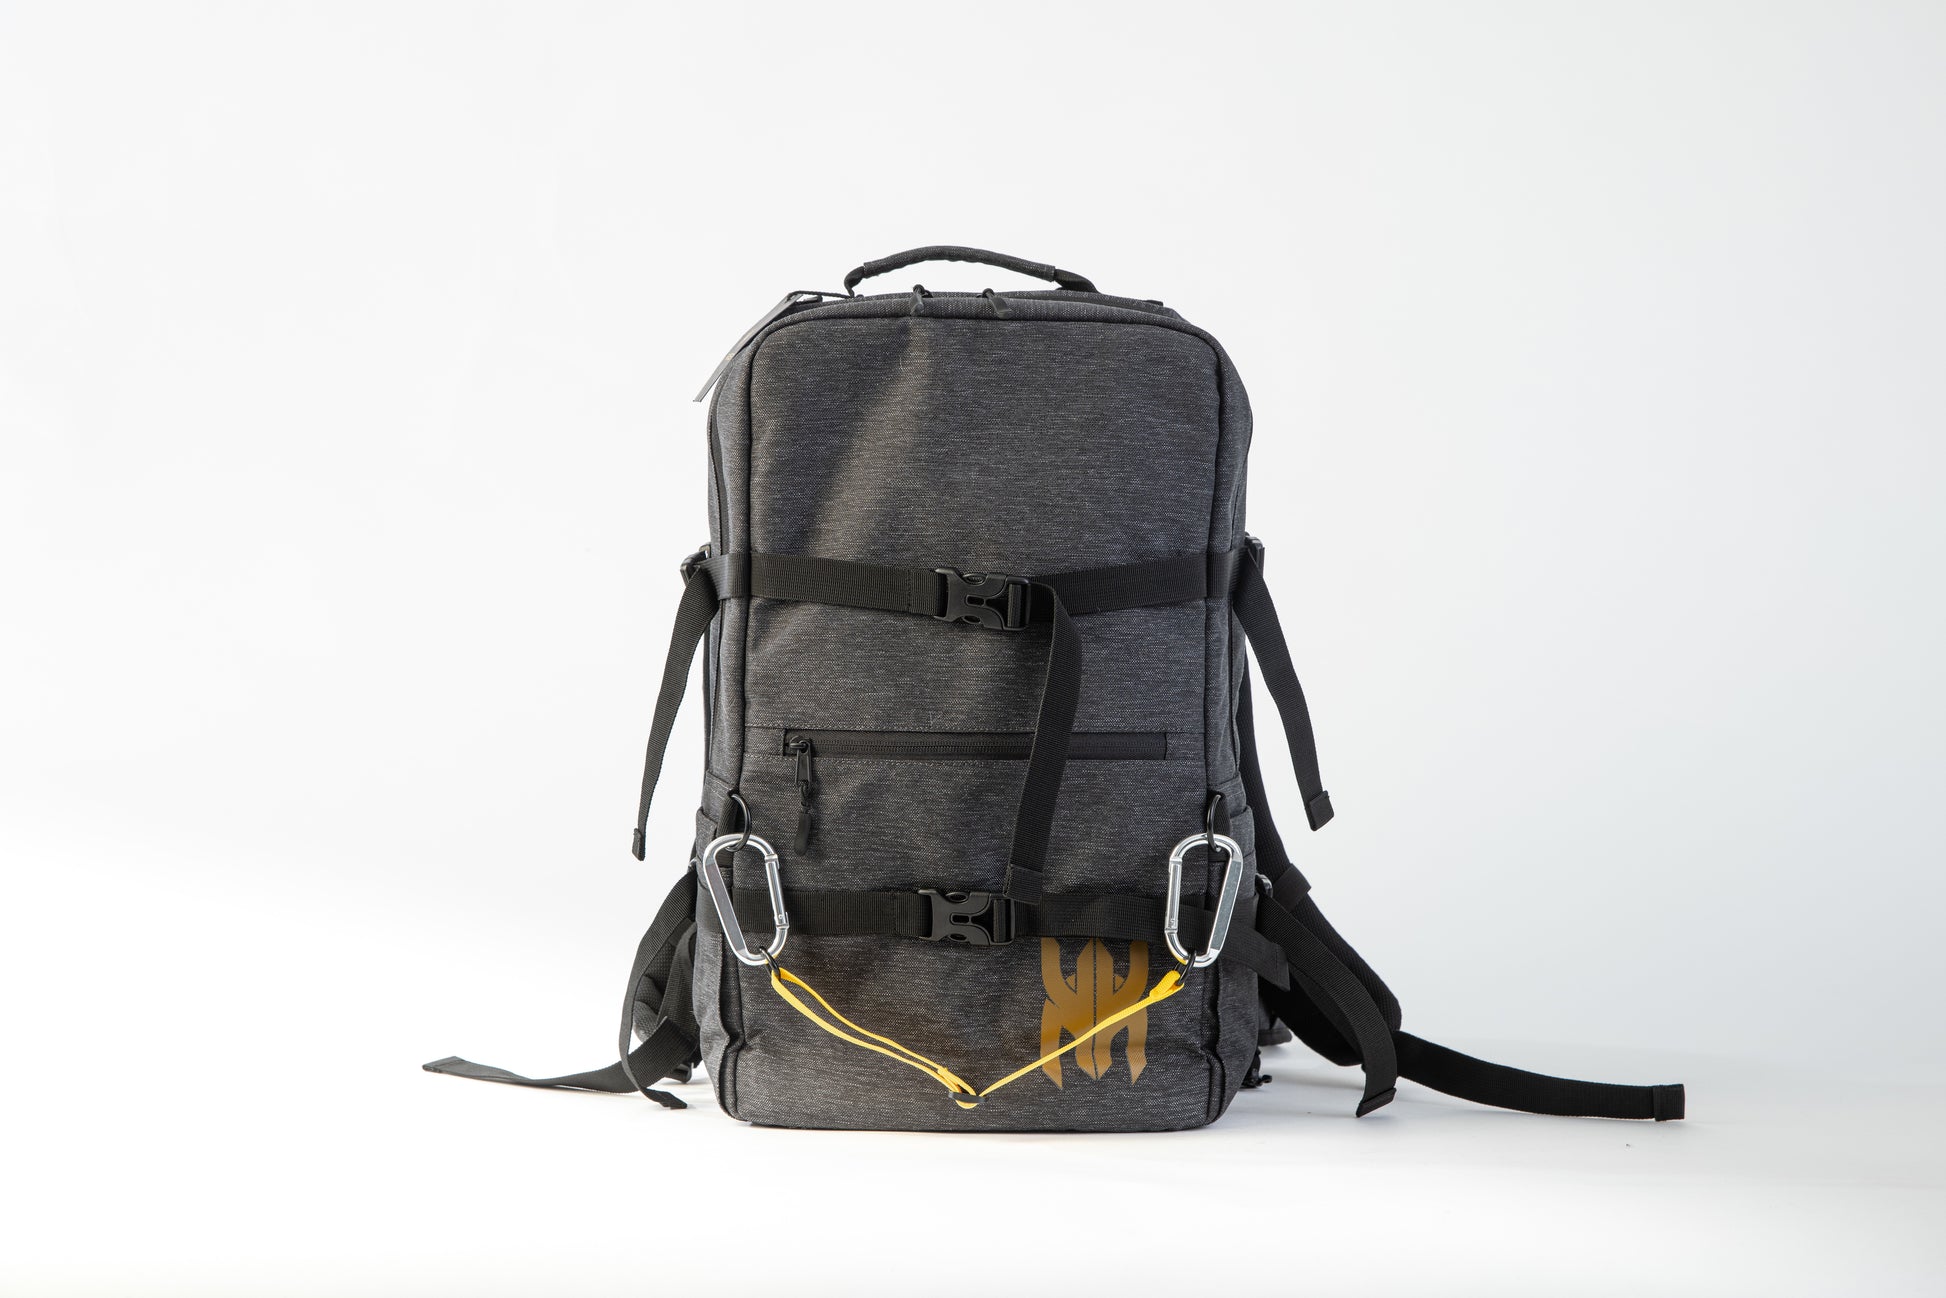 Grey CrossFit pack with accessory strap